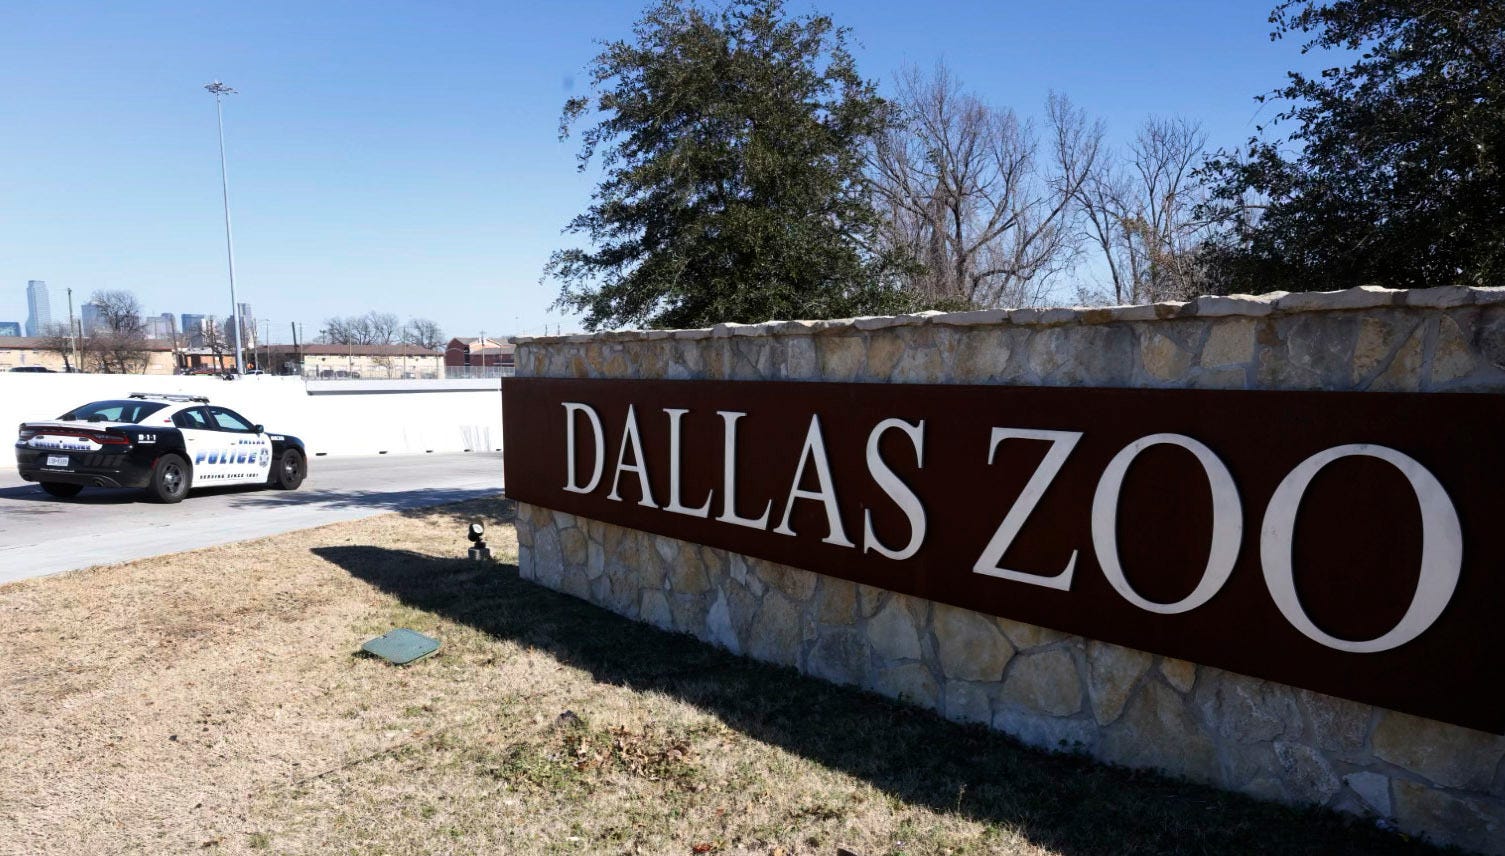 Suspect in Dallas Zoo's missing animal mysteries arrested, facing animal cruelty charges